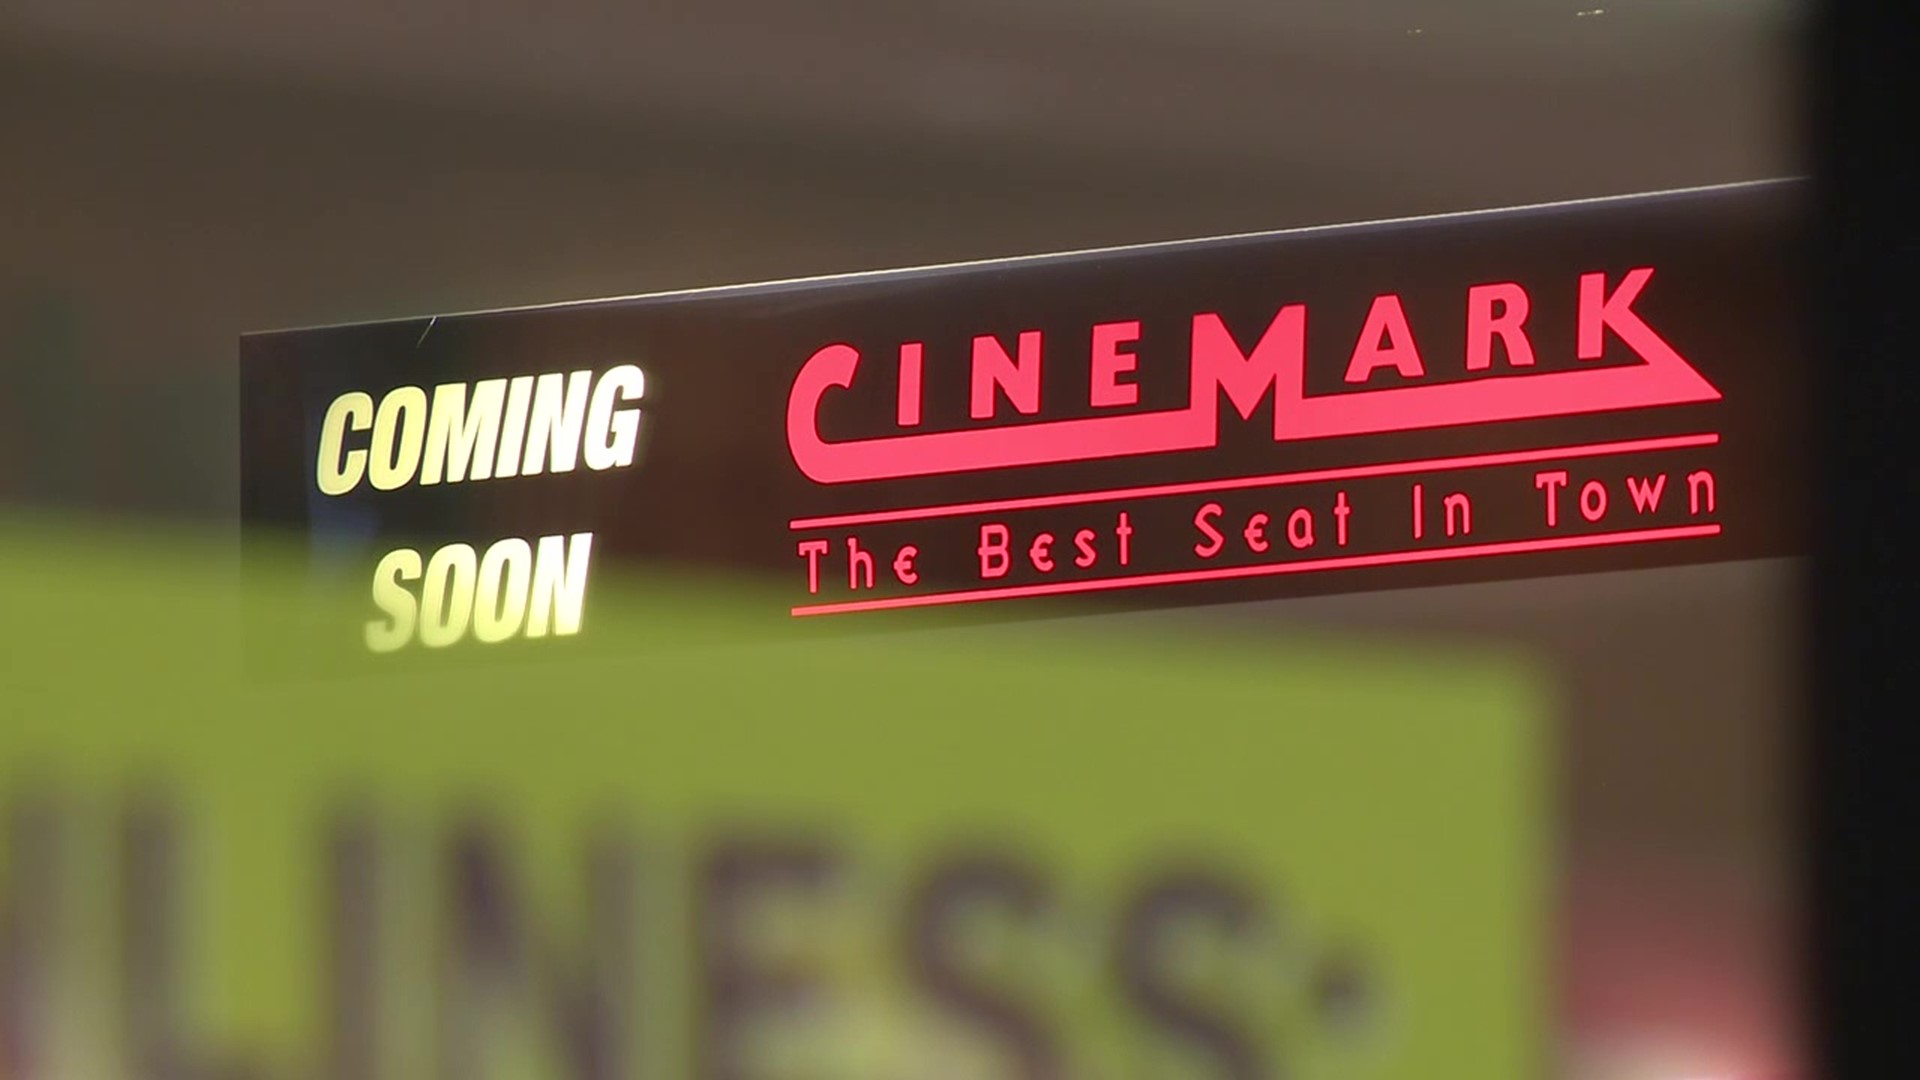 Cinemark plans to turn silver screens back on this Friday but are people ready to go back to the theater?